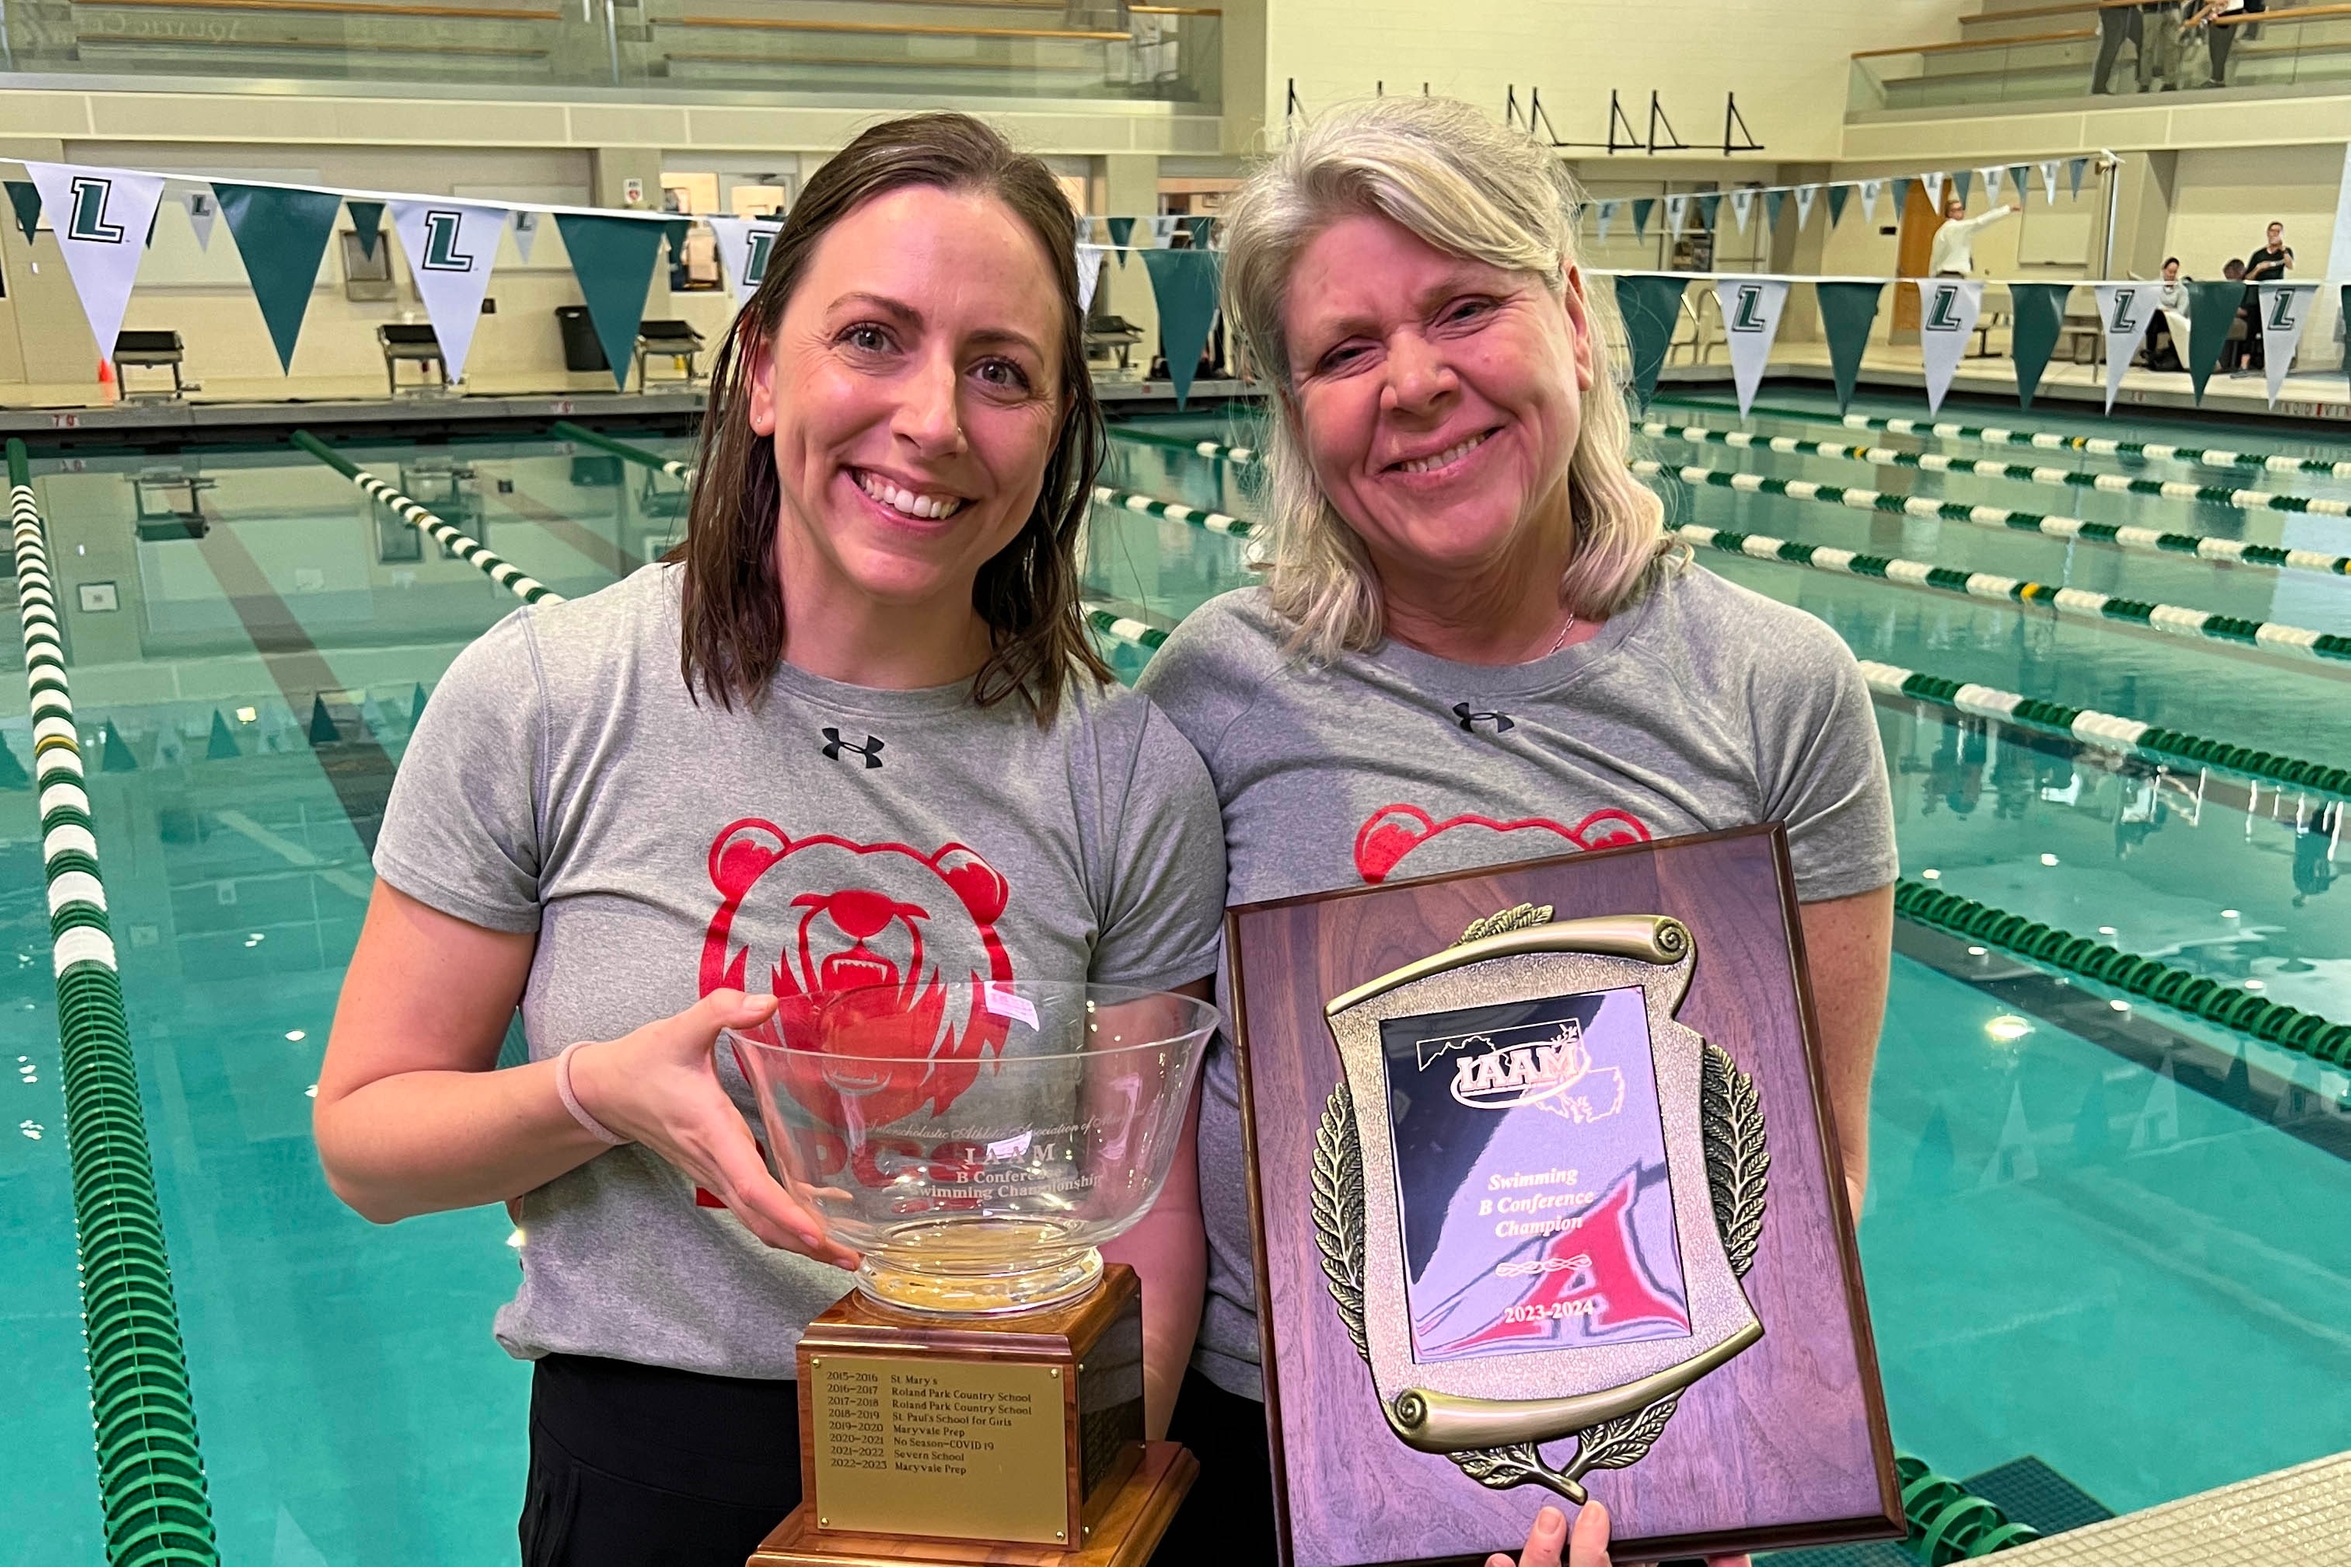 Toni Armstrong named IAAM Swimming Coach of the Year